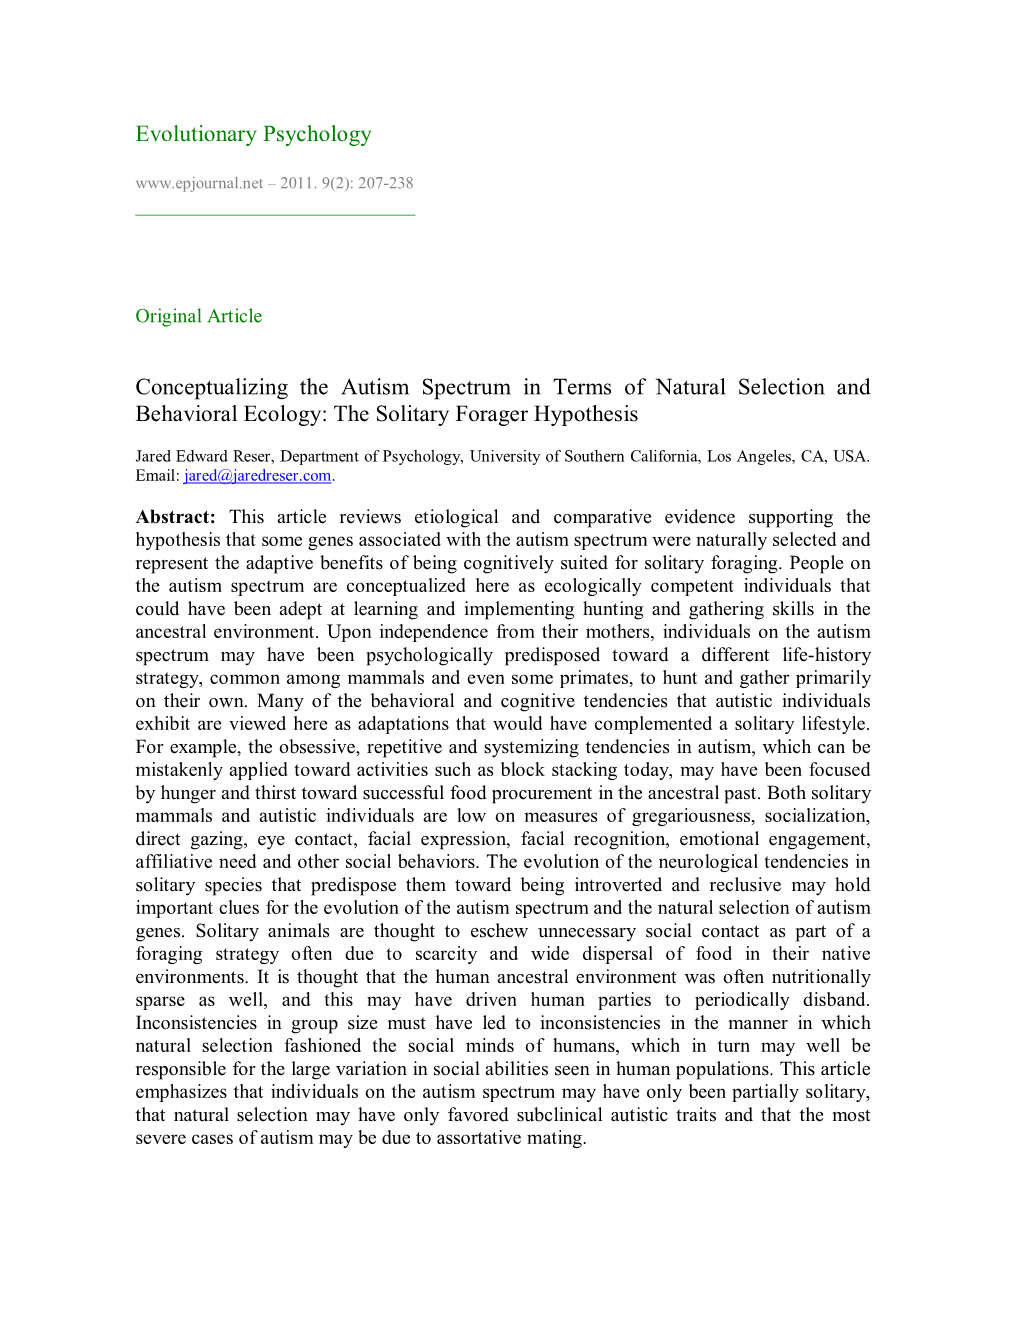 Conceptualizing the Autism Spectrum in Terms of Natural Selection and Behavioral Ecology: the Solitary Forager Hypothesis